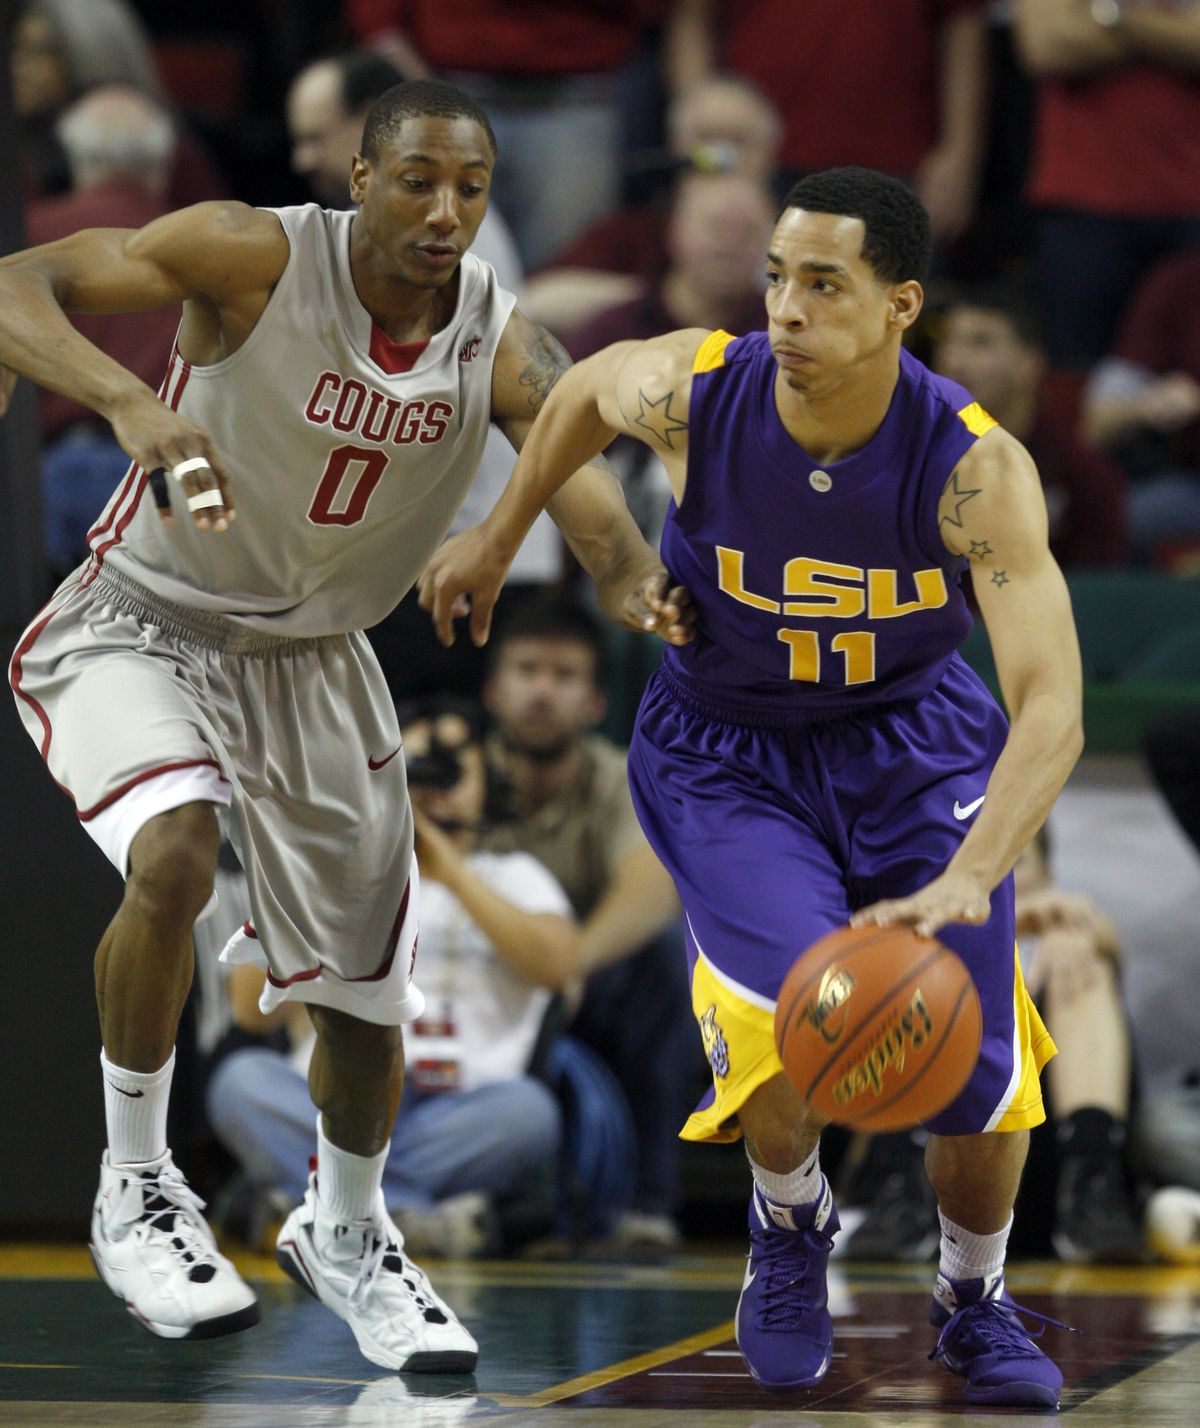 Washington’s State’s Marcus Capers, left, pressures LSU’s Bo Spencer during the first half.  (Associated Press)